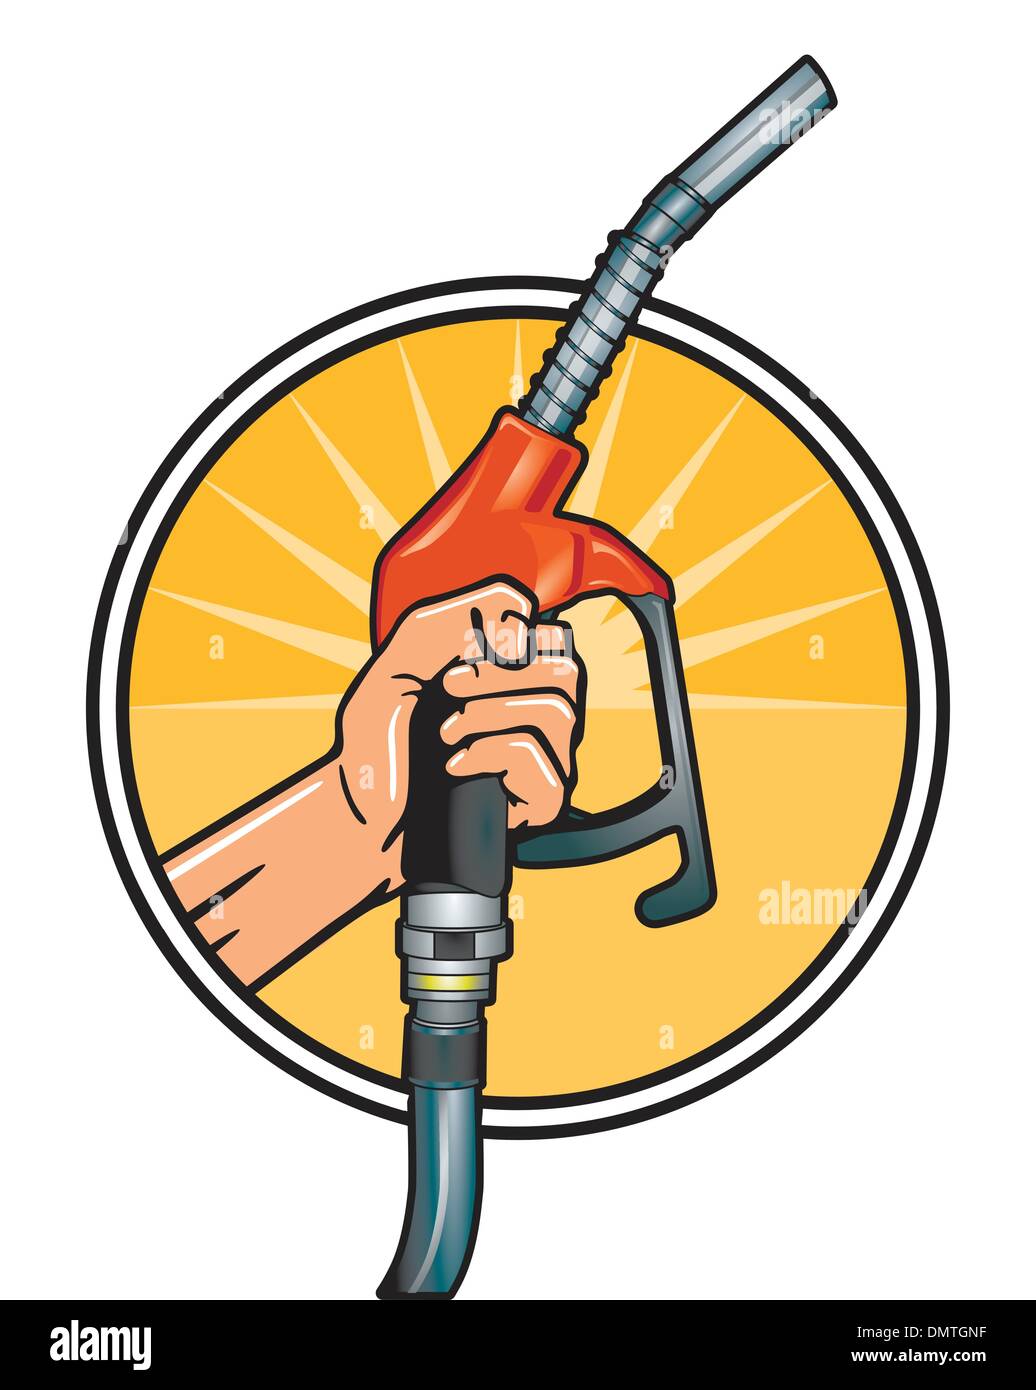 Fill up economically Stock Vector